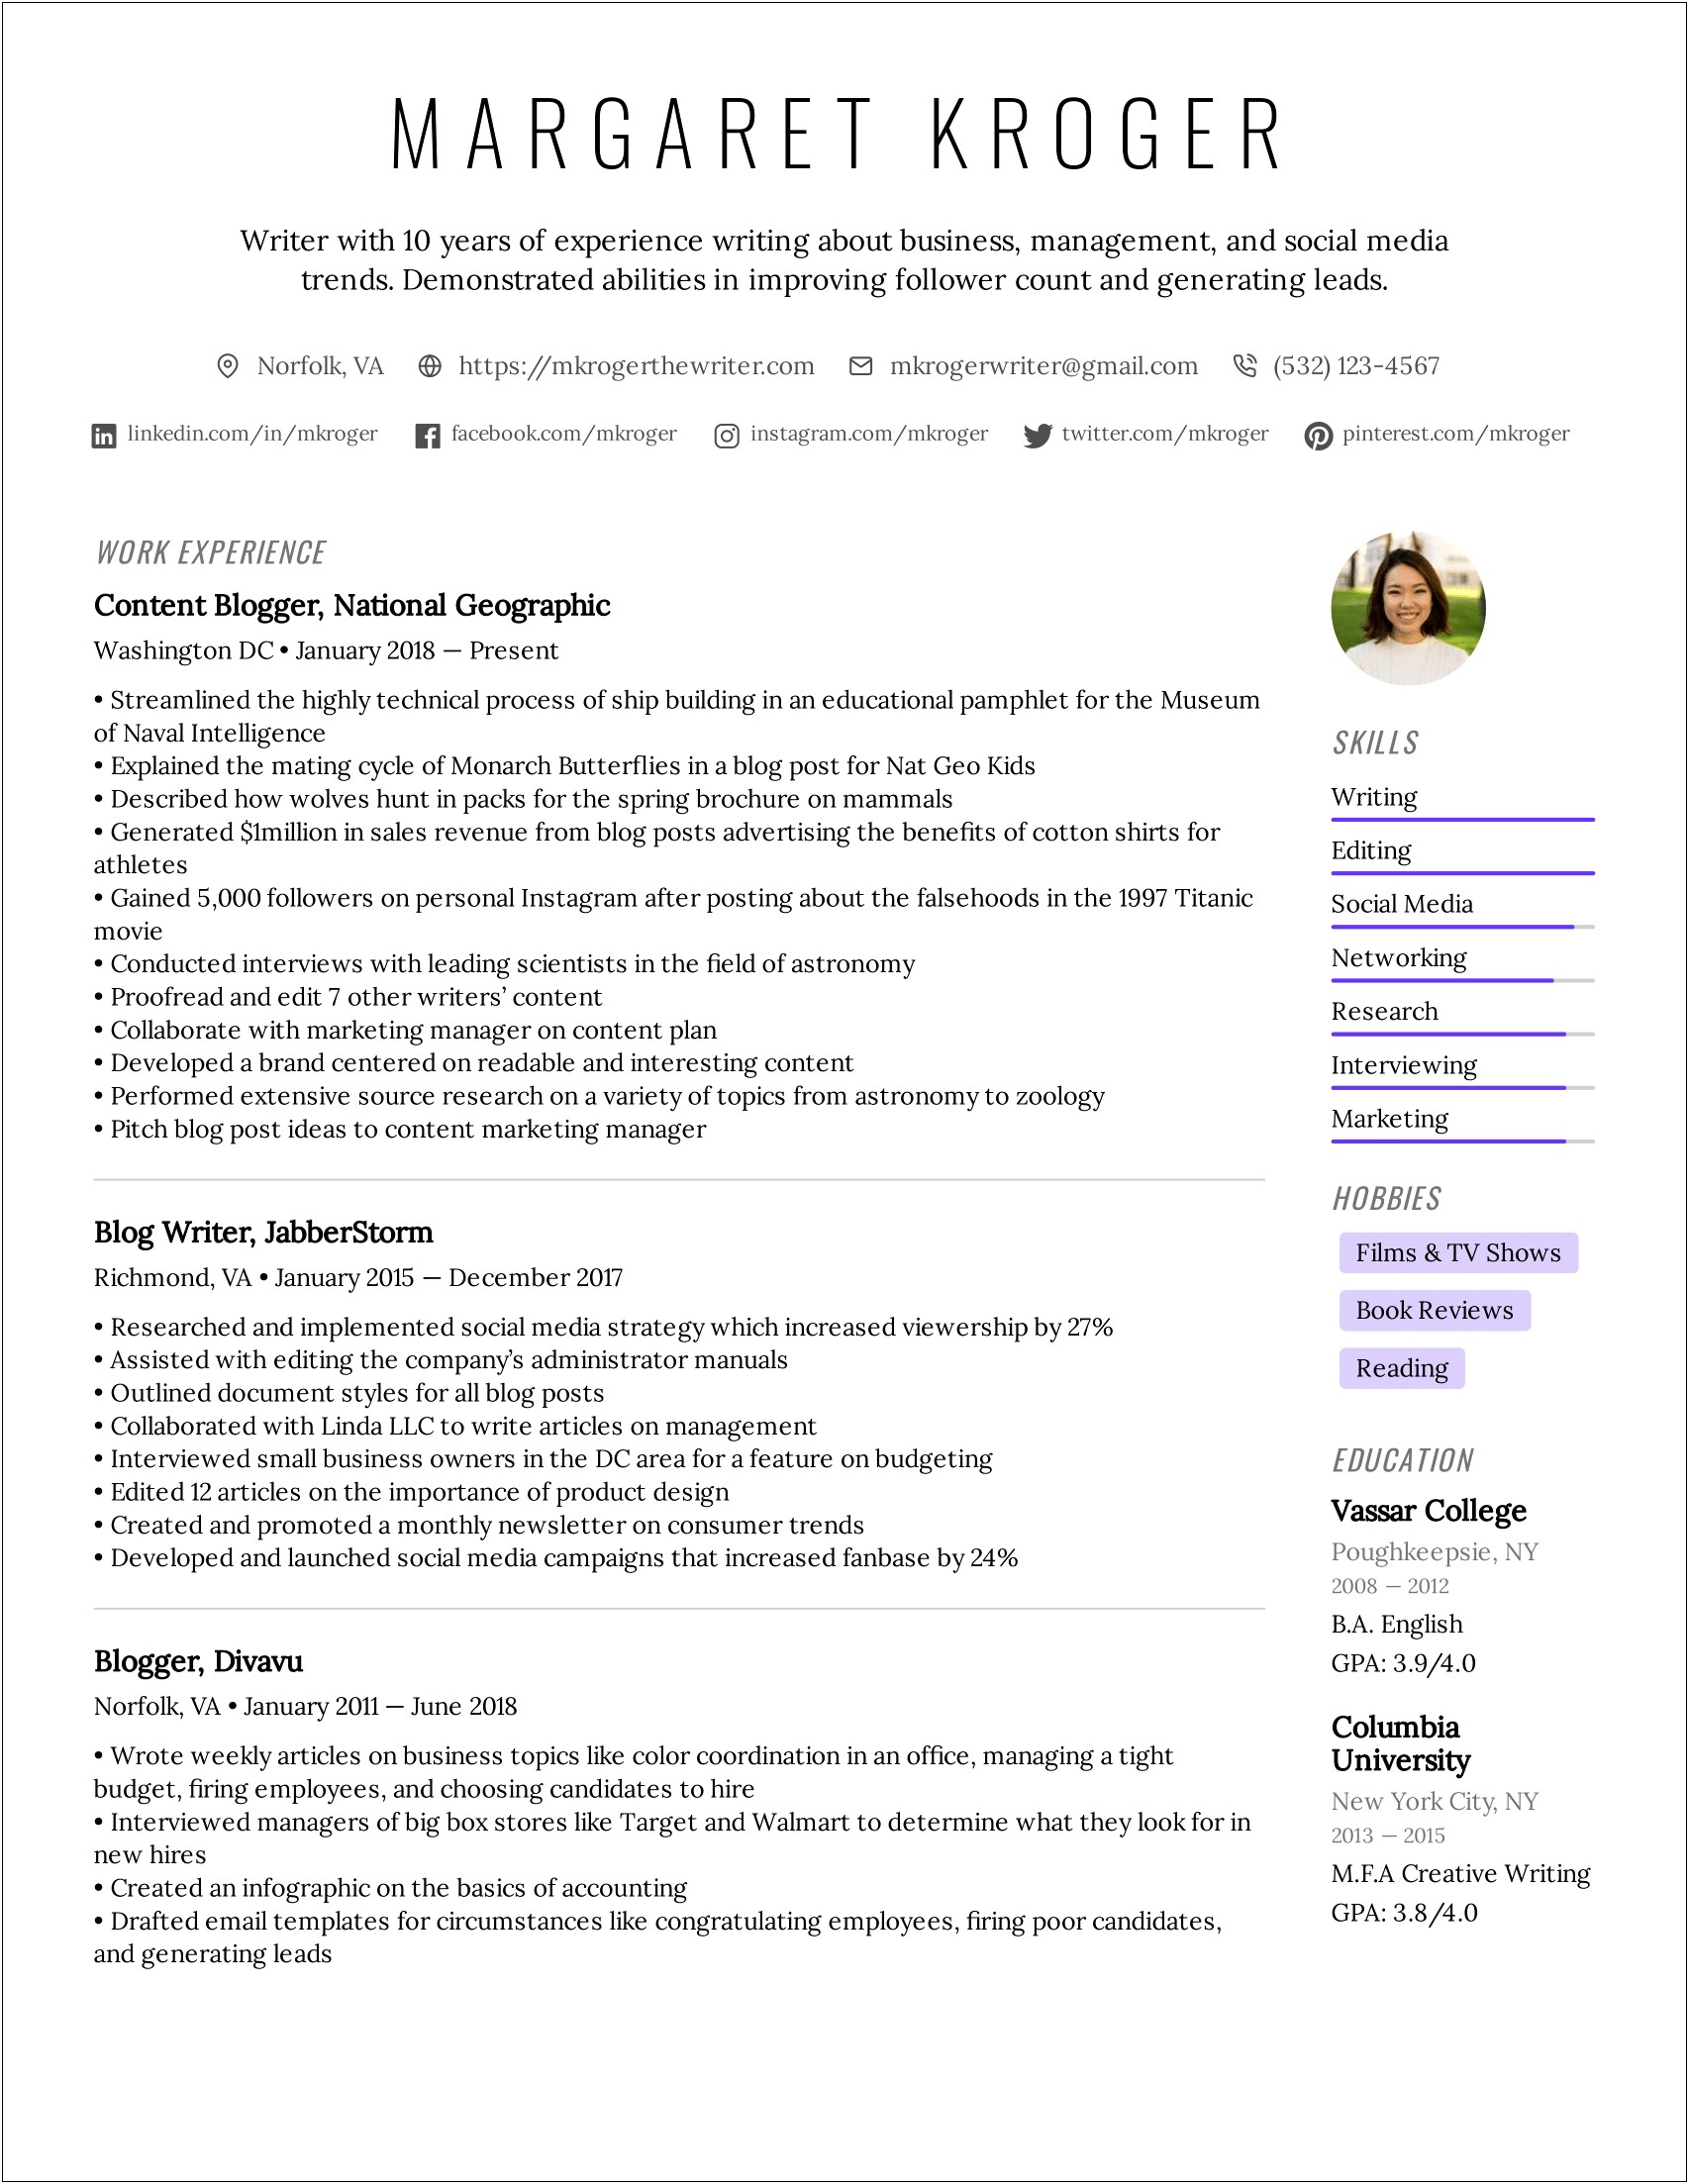 Where To Put Research On Resume